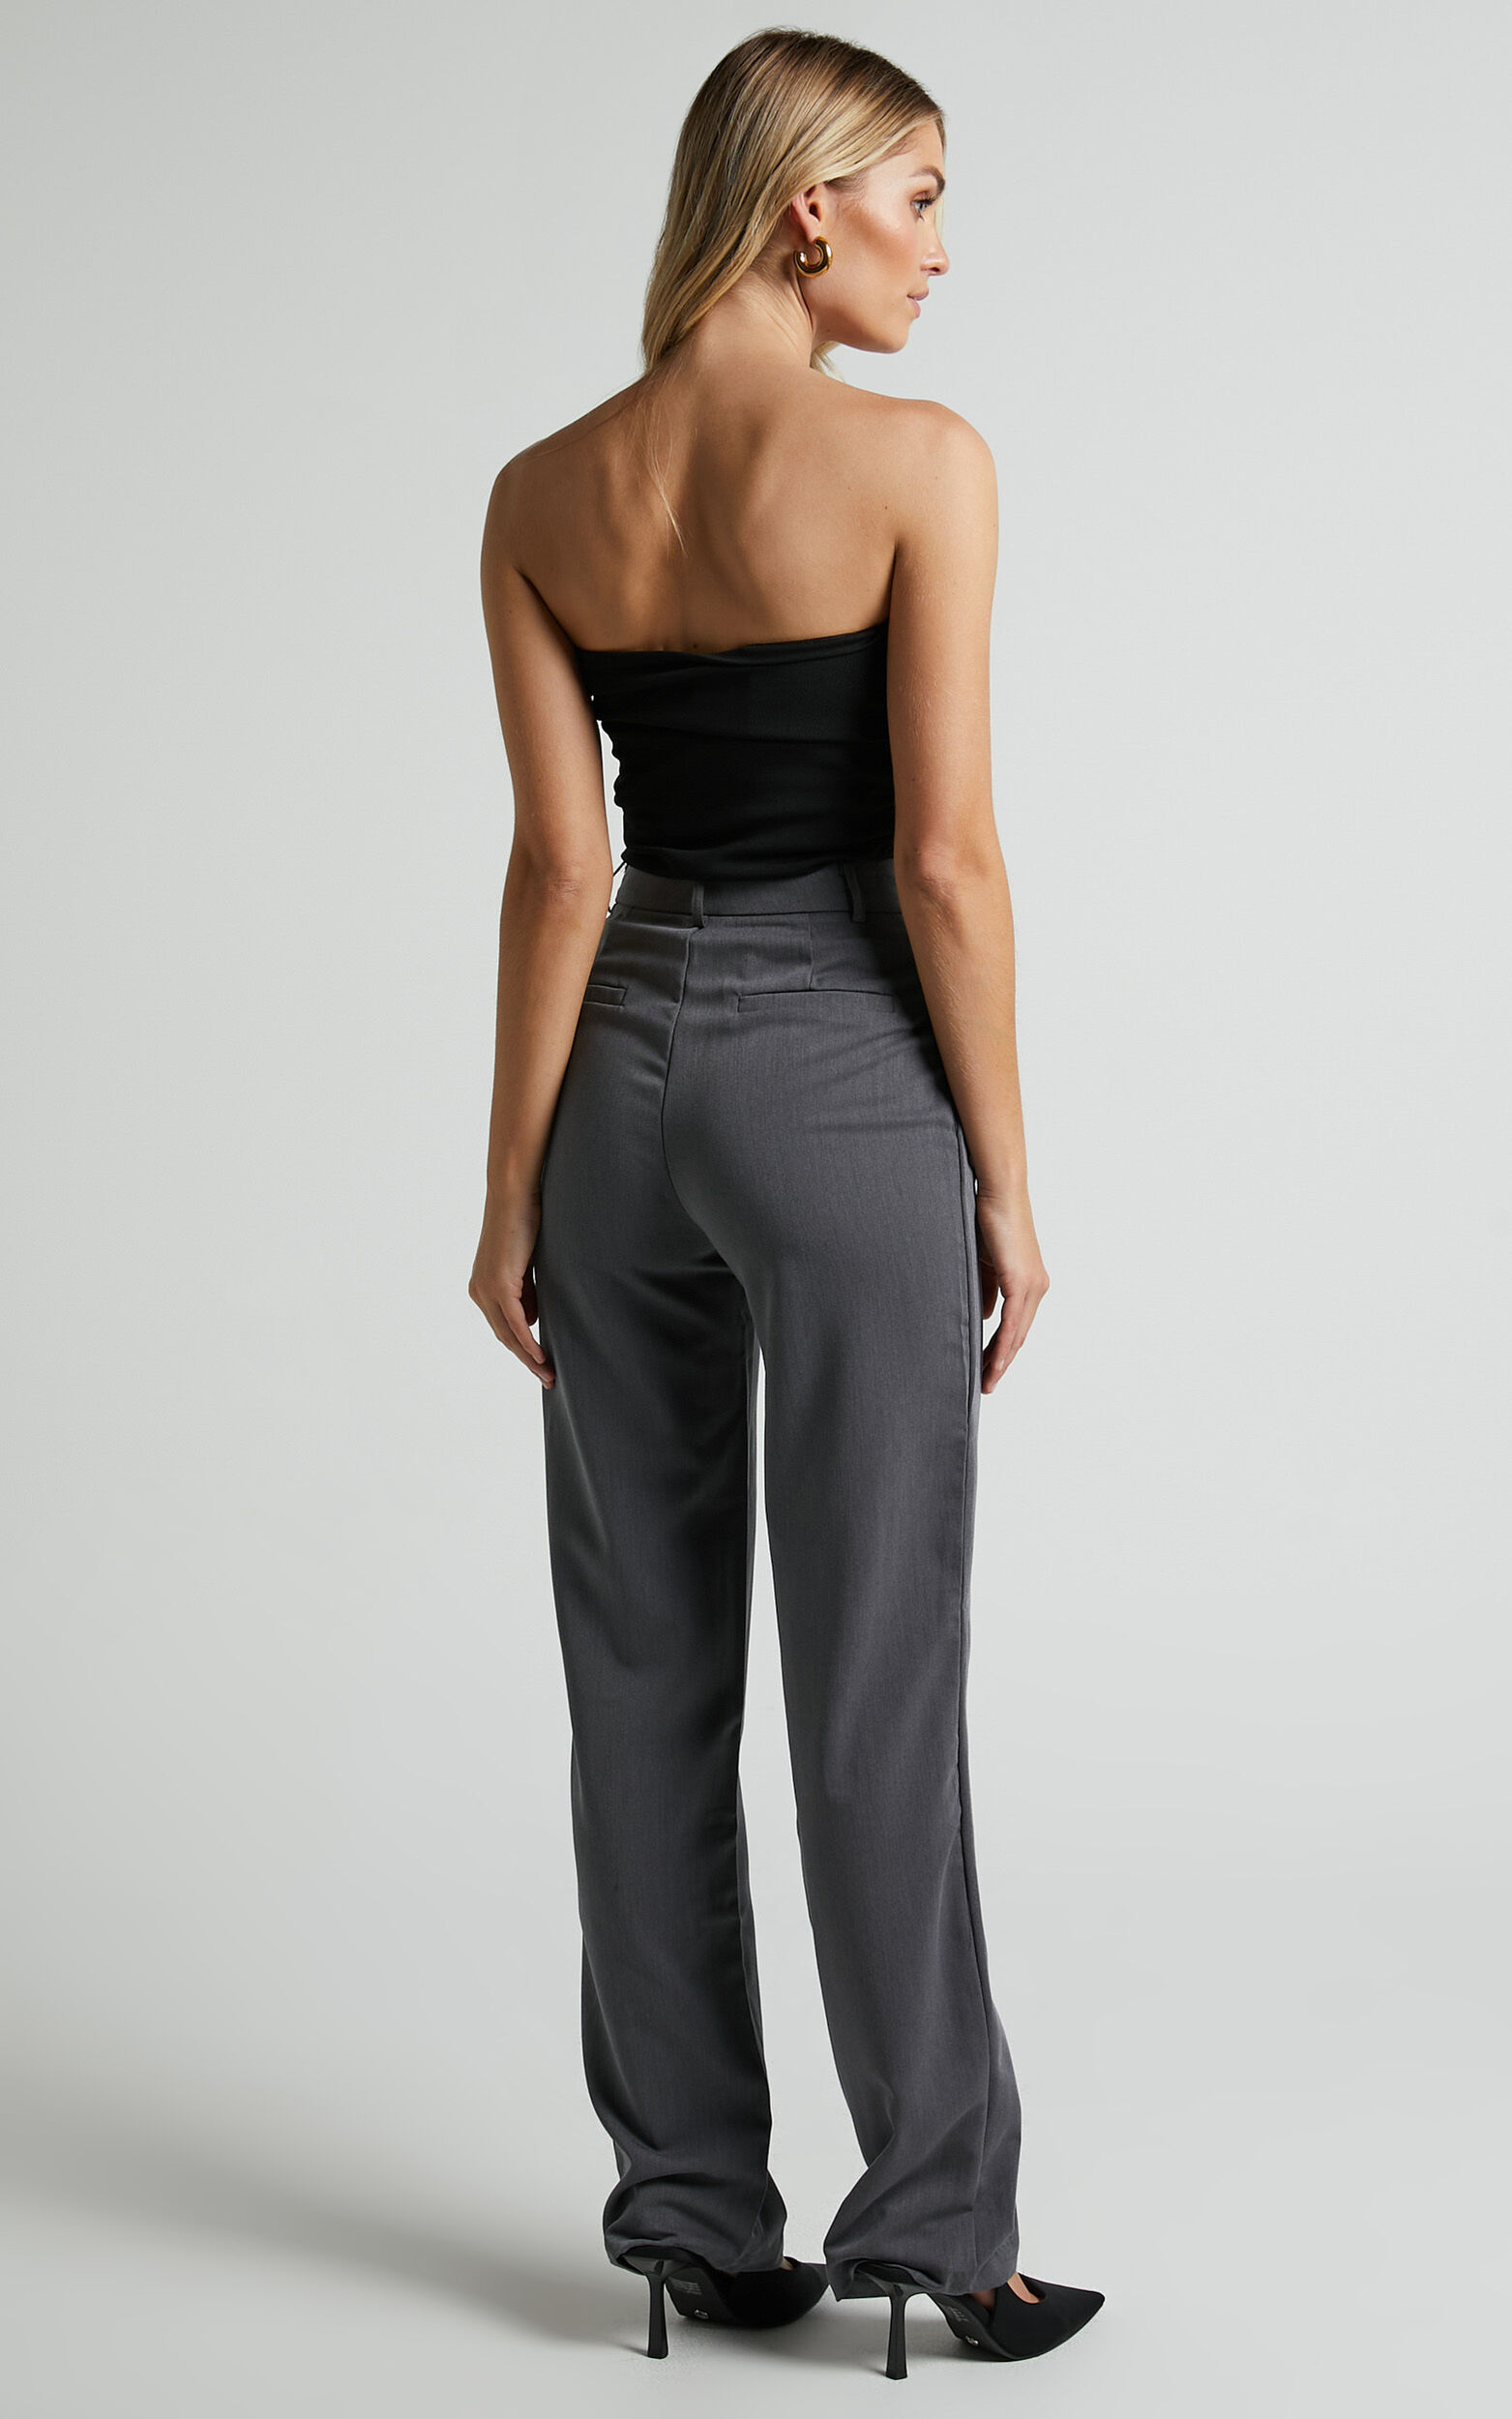 Lorcan Pants - High Waisted Tailored Pants in Charcoal